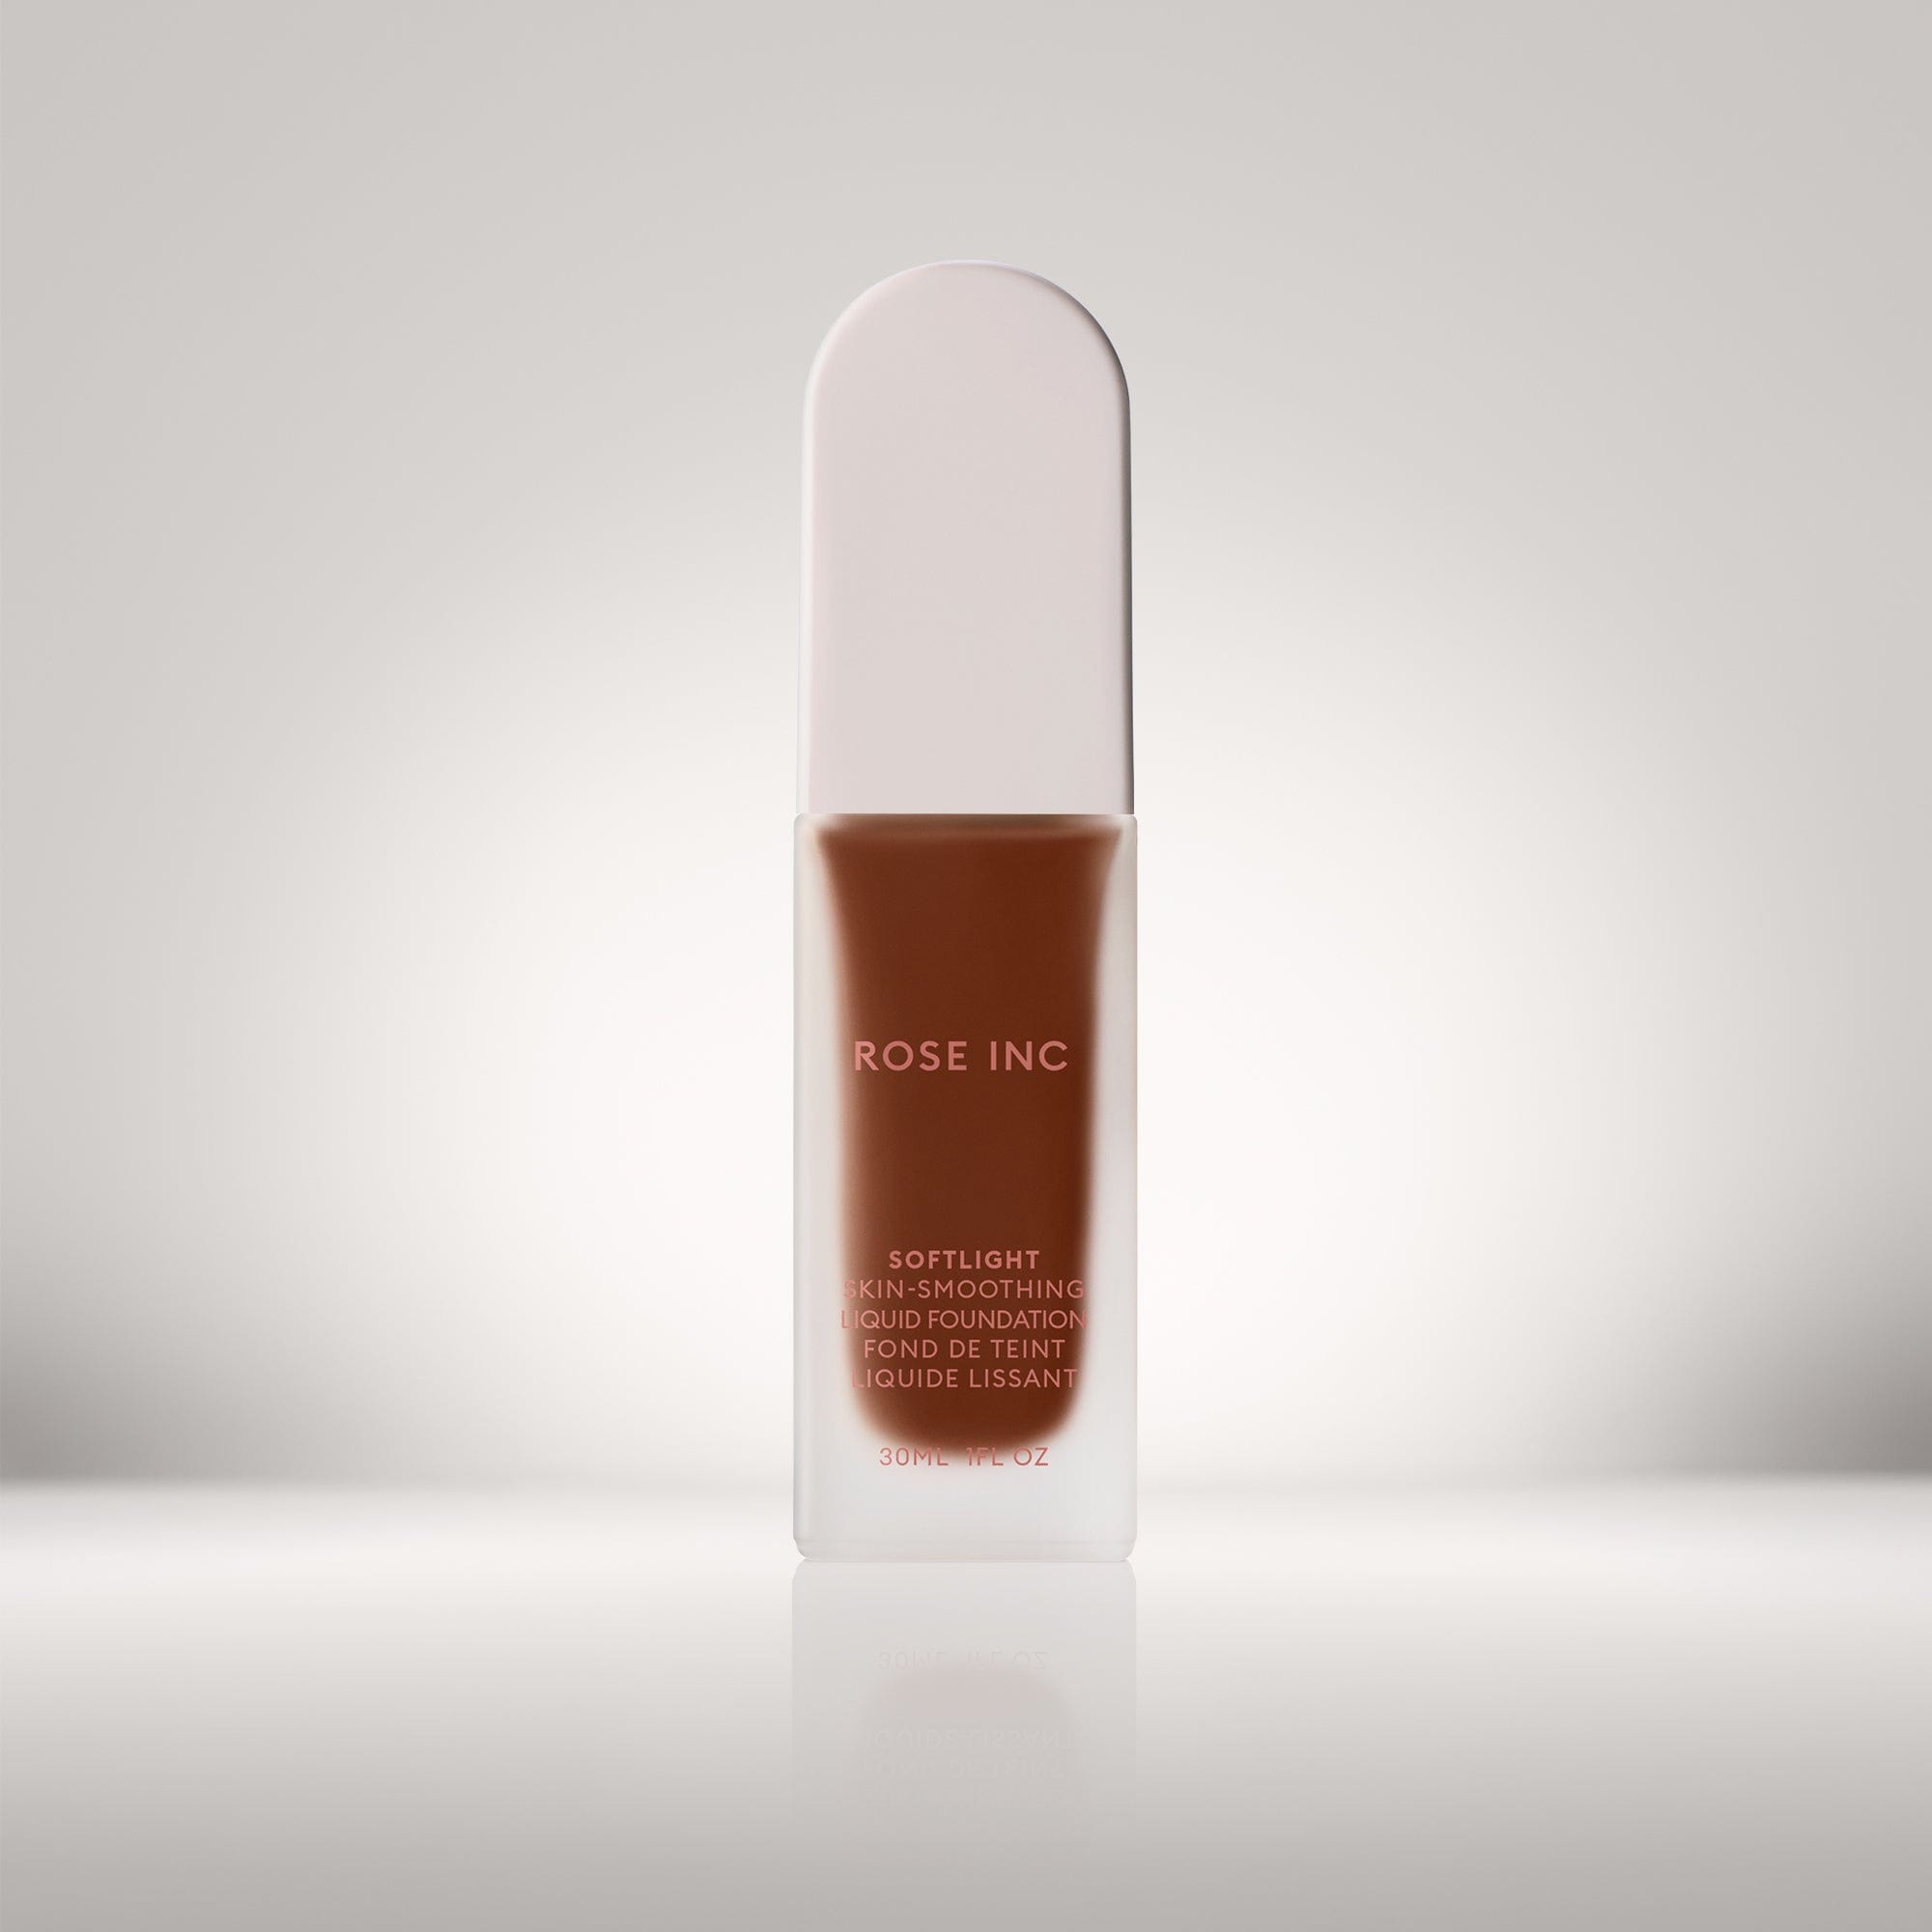 Soldier image of shade 30W in Softlight Smoothing Foundation